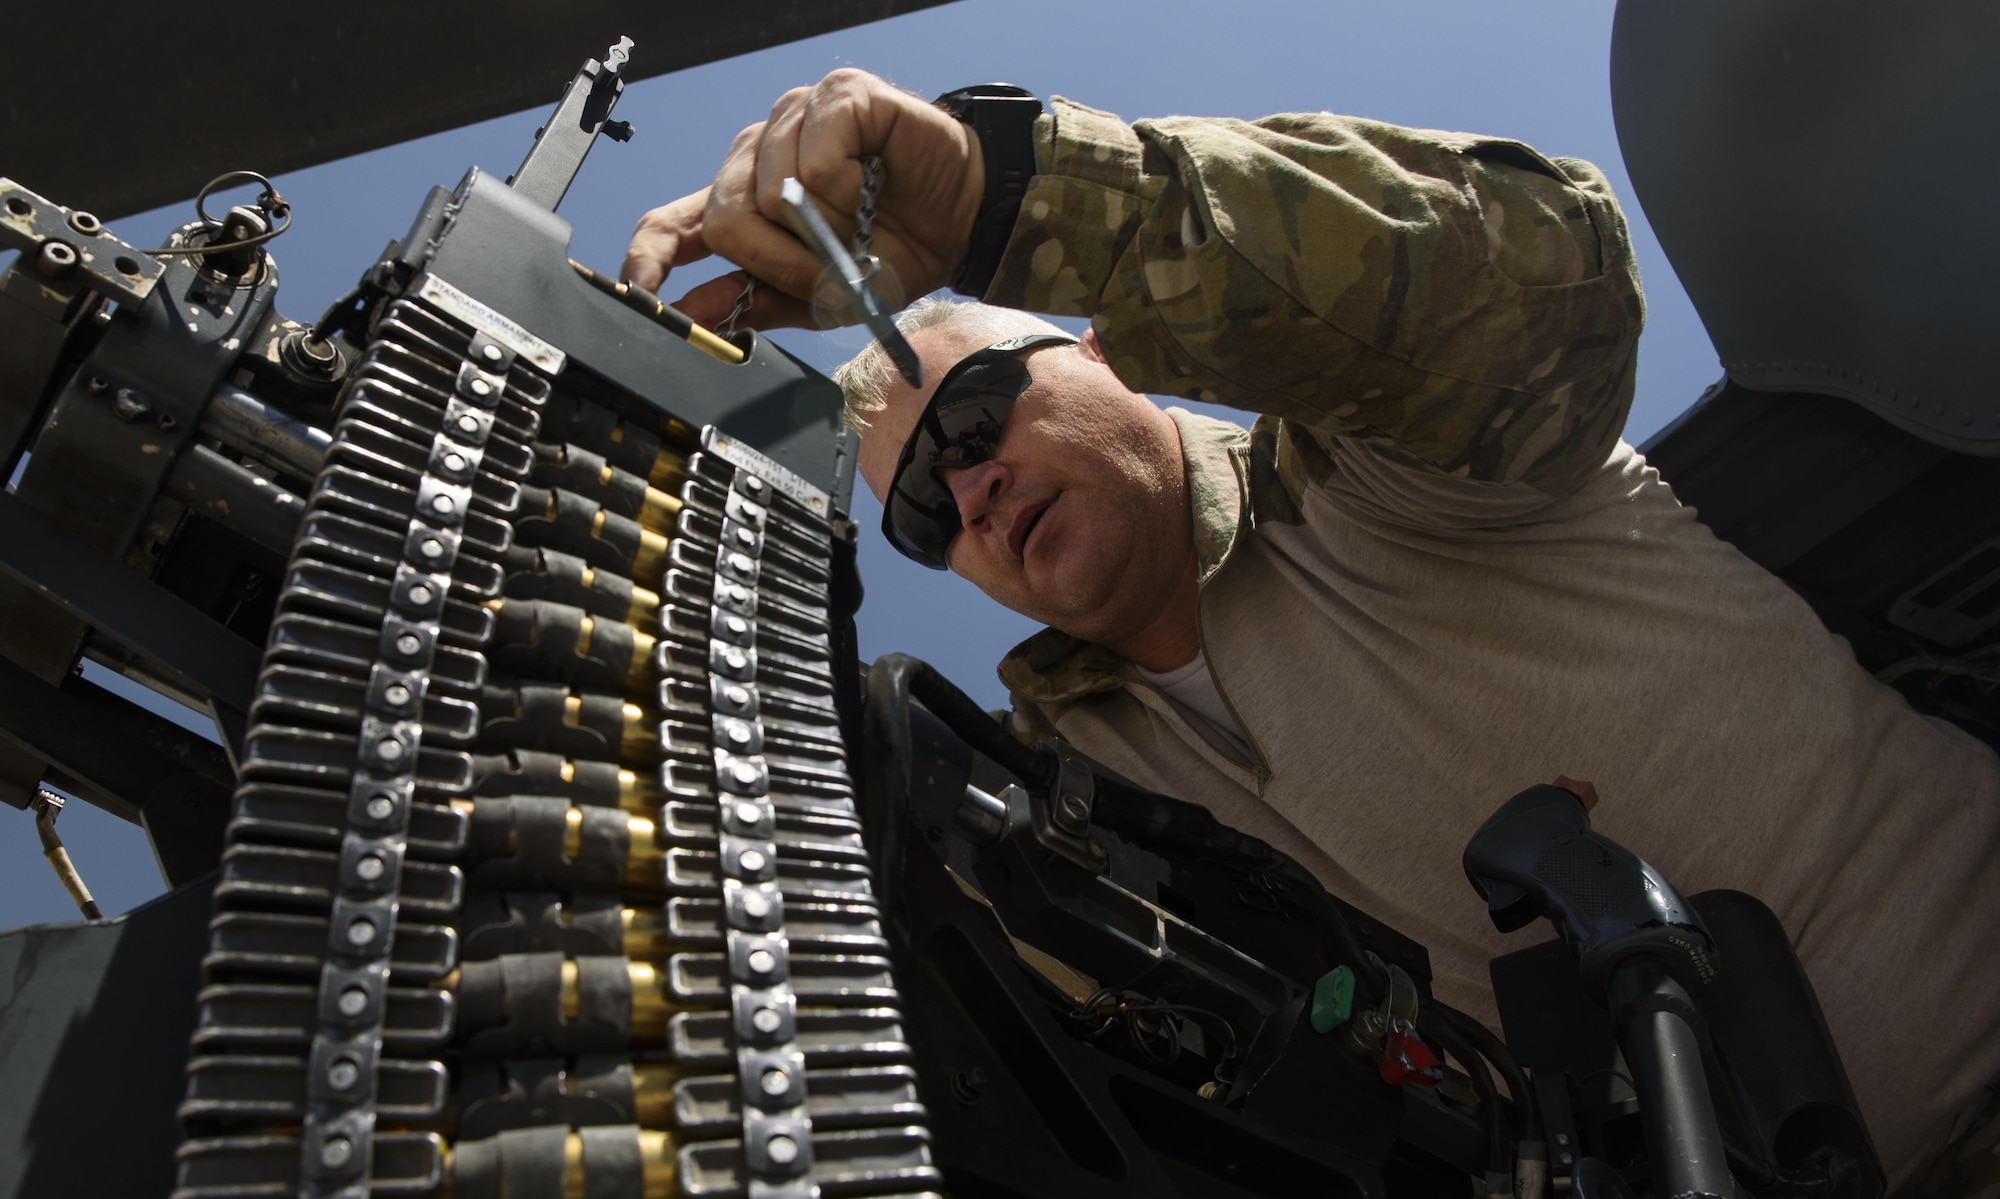 Tech. Sgt. Wayne Cowen, an 83rd Expeditionary Rescue Squadron special missions aviator, loads ammunition into a .50 caliber machine gun on Bagram Airfield, Afghanistan, July 4, 2017. As a special missions aviator, Cowen is a jack-of-all-trades; he conducts pre-flight inspections, maintains the aircraft systems while airborne and employs the aircraft weapons systems in the event of an attack. (U.S. Air Force photo by Staff Sgt. Benjamin Gonsier) 